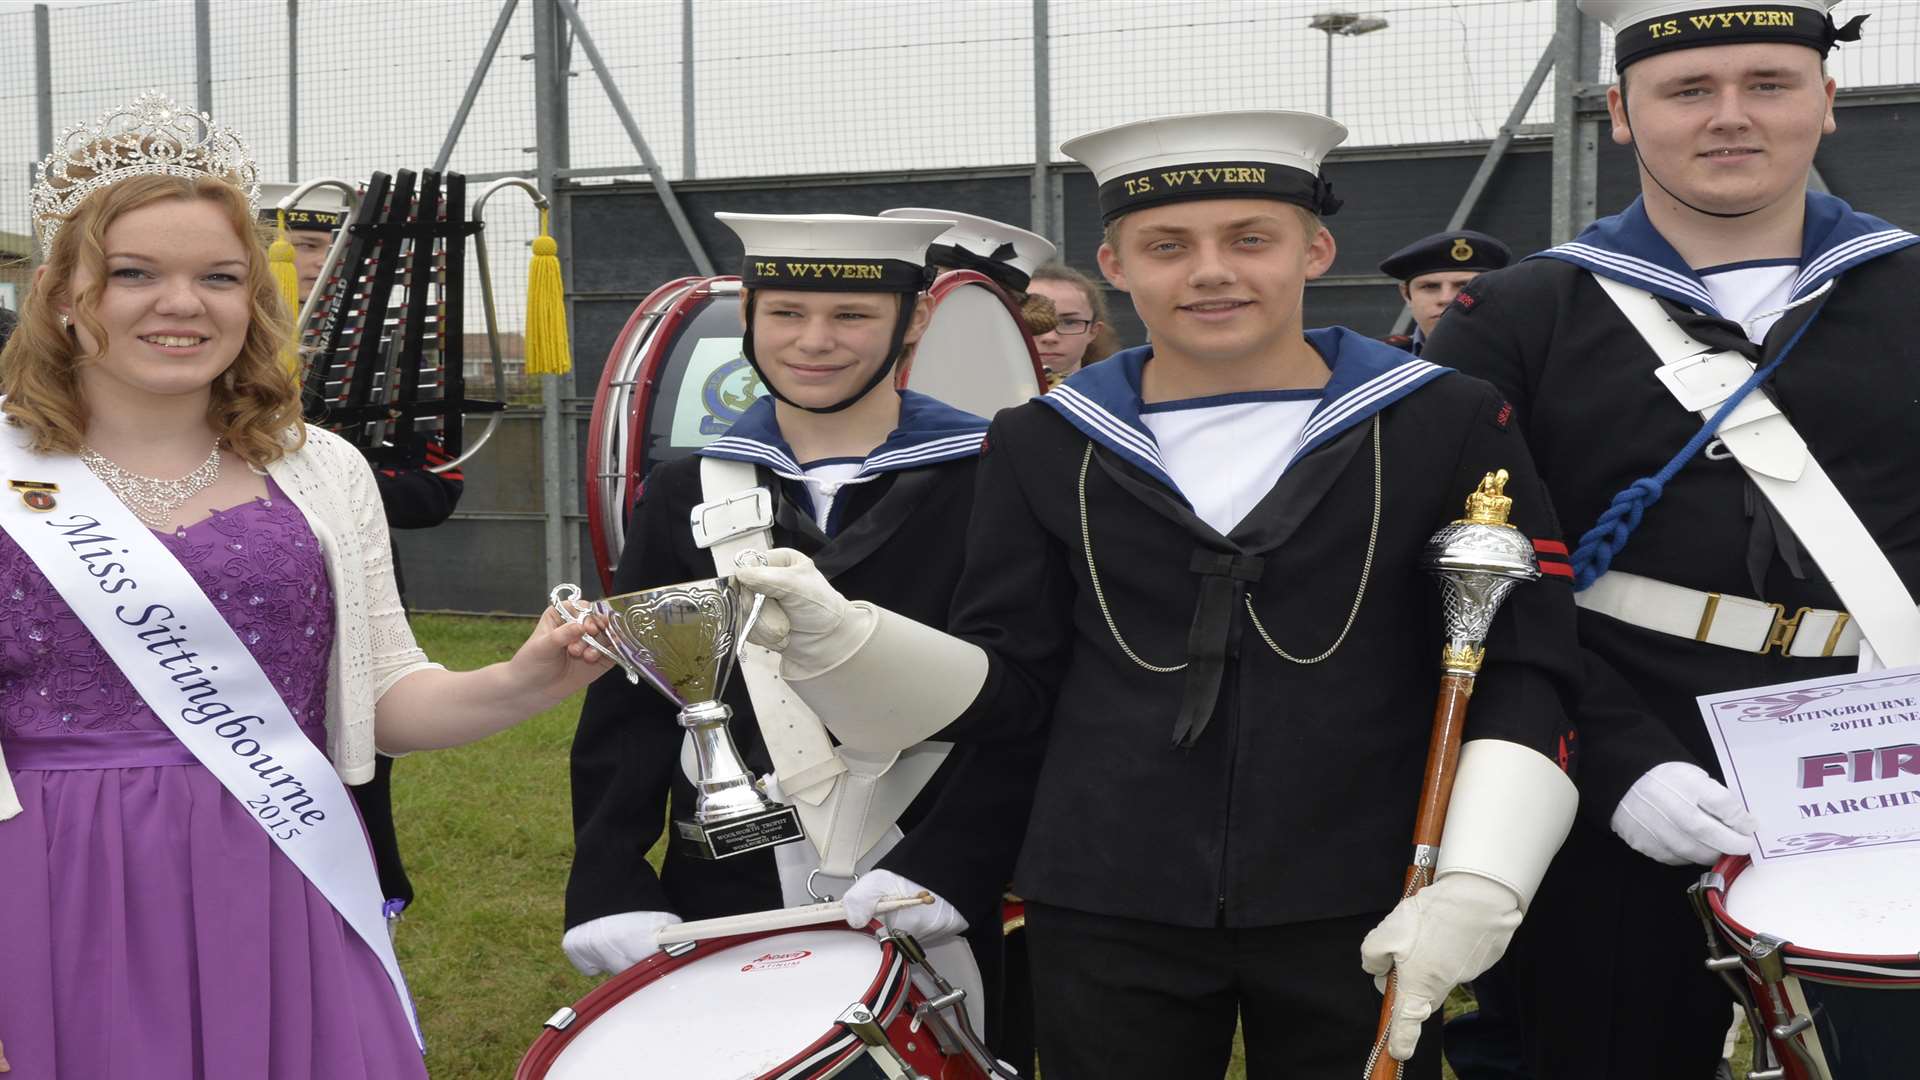 Sittingbourne carnival 2015- the carnival parade. The band win first prize from Miss Sittingbourne